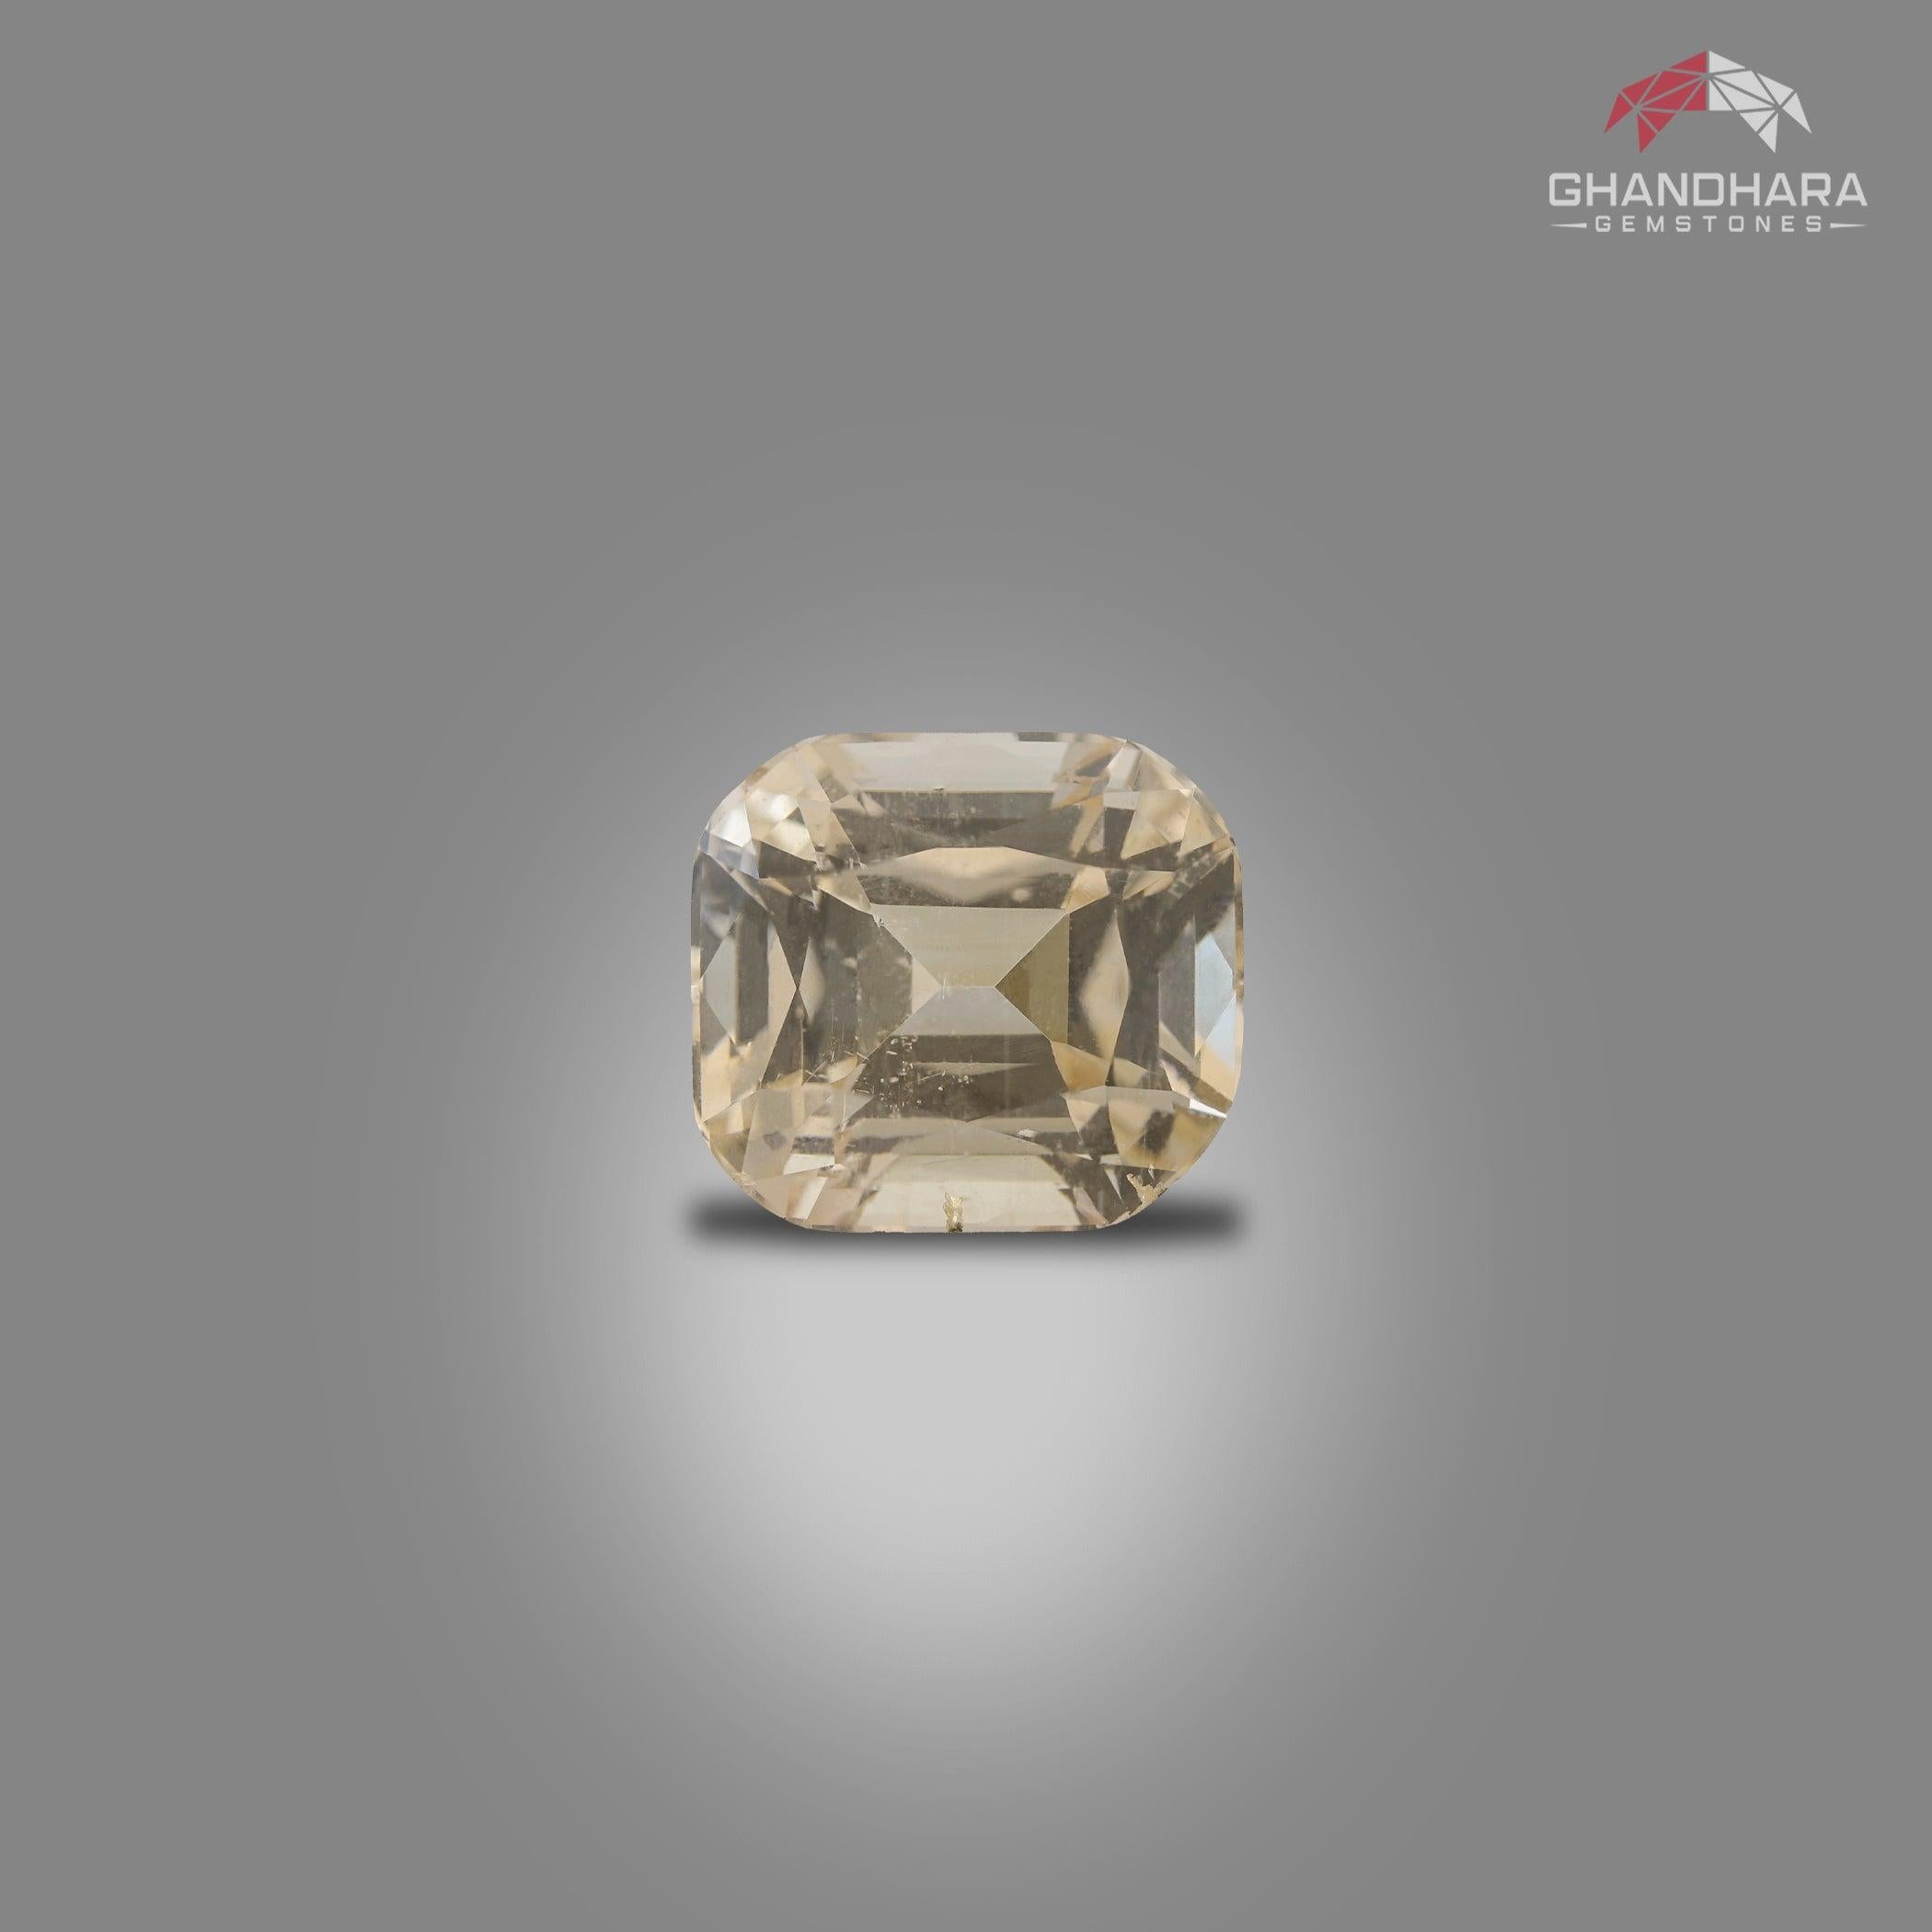 Golden Natural Topaz Gemstone of 16.70 carats from Skardu, Pakistan has a wonderful cut in a Cushion shape, incredible Gold color. Great brilliance. This gem is VVS Clarity. 
Product Information:
GEMSTONE NAME:  Golden Natural Topaz